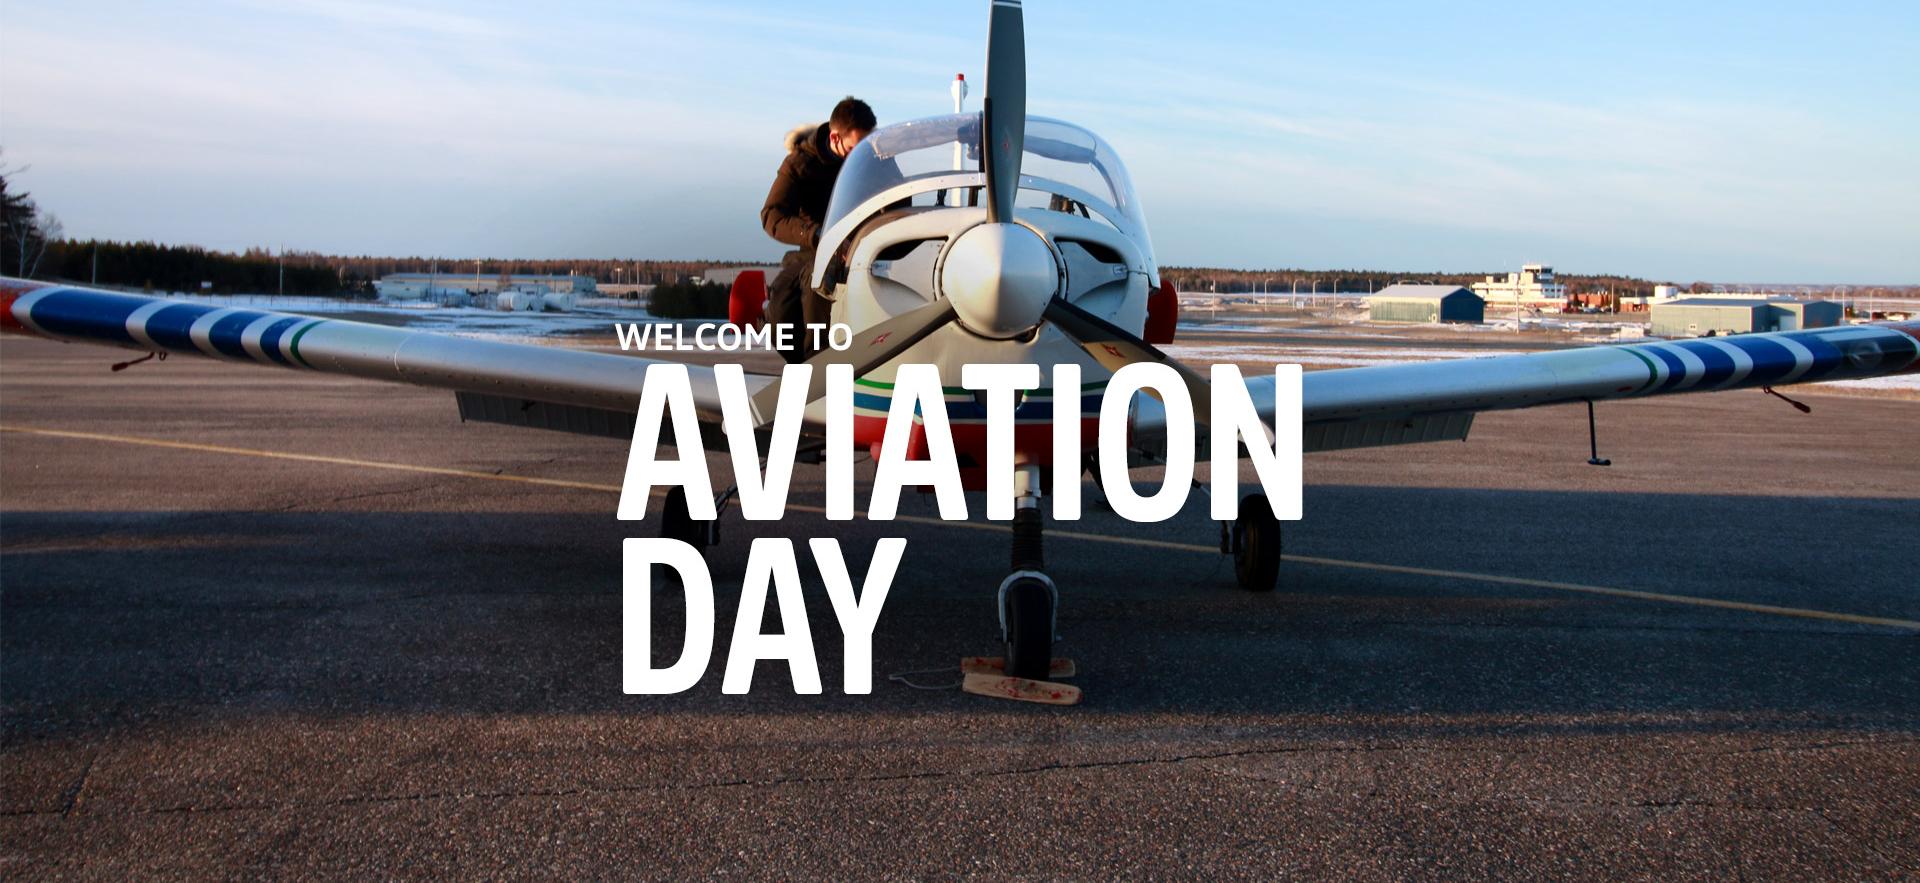 student on a plane landed at the Sault College Hangar with white text overlay that says Welcome to Aviation Day